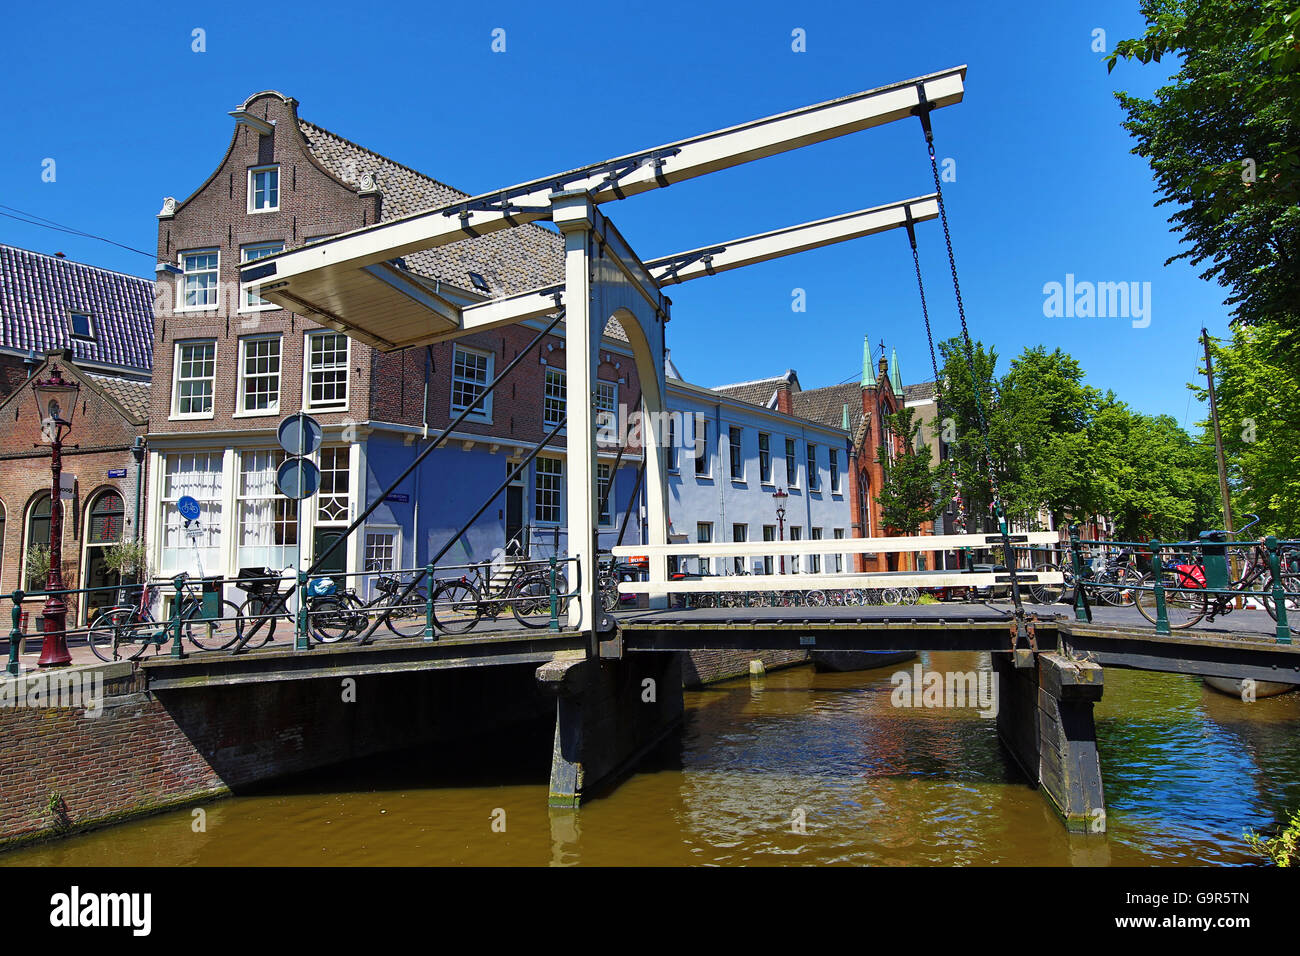 Staalmeestersbrug draw bridge over the Groenburgwal canal in Amsterdam, Holland Stock Photo